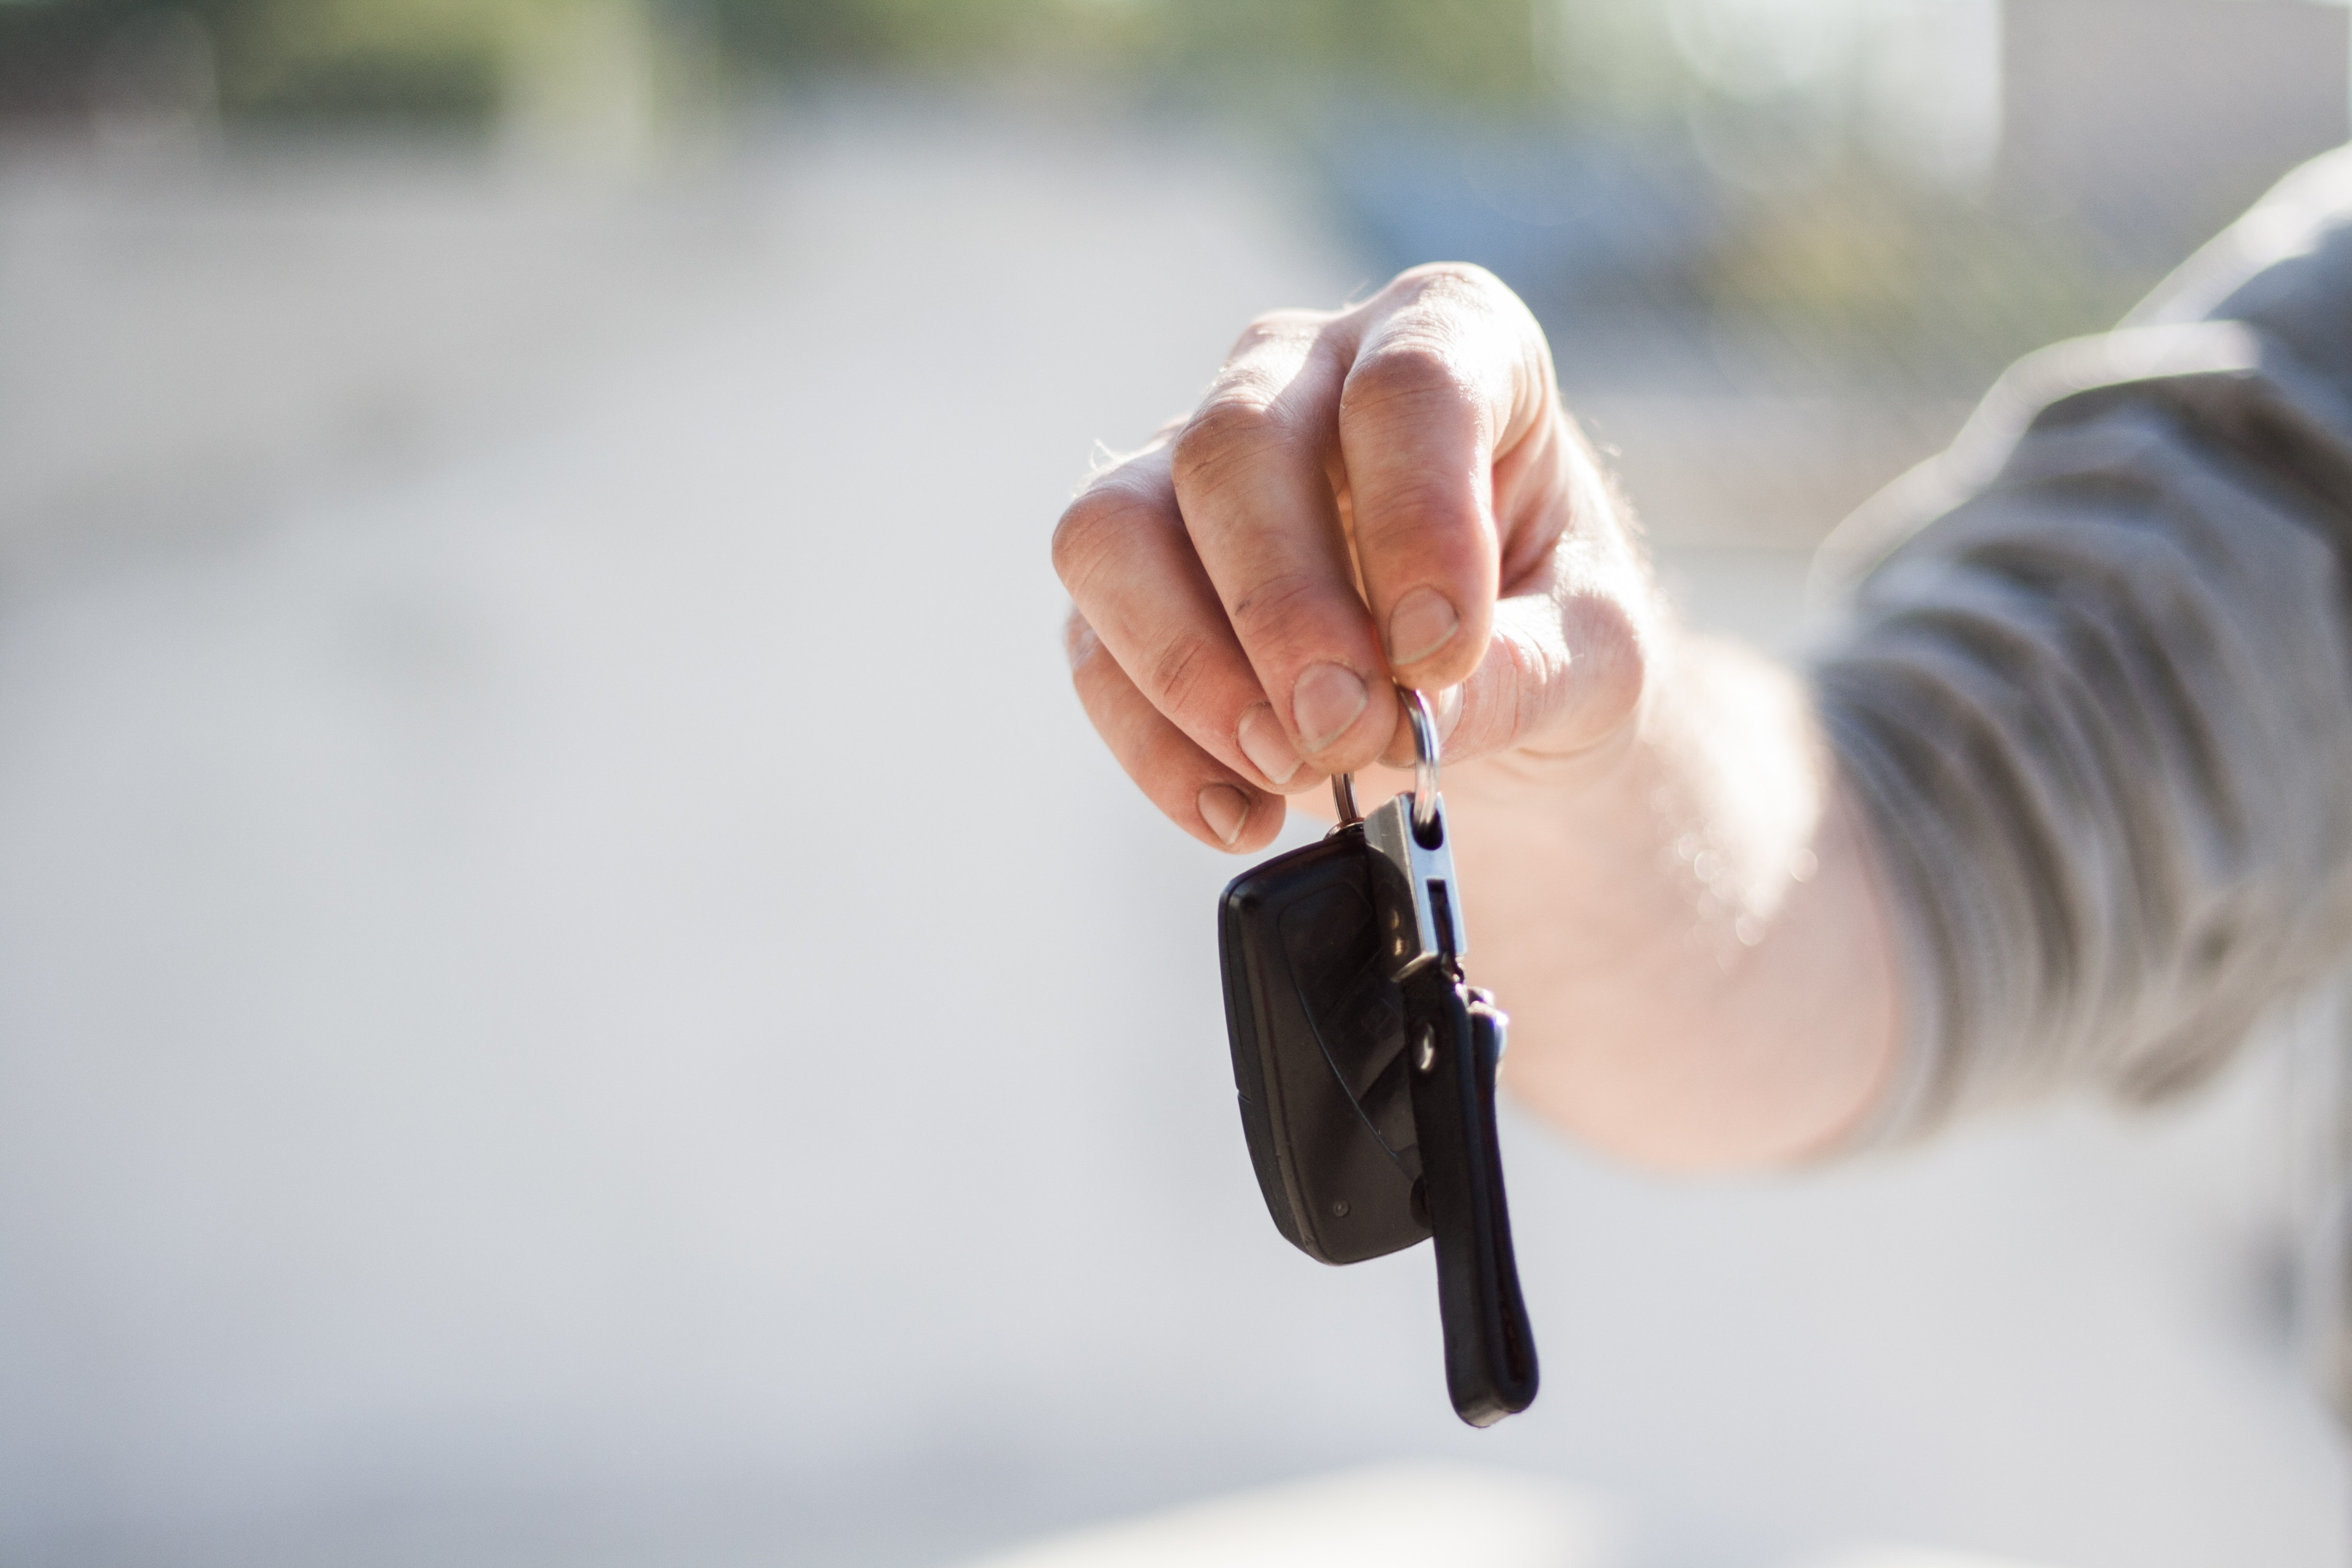 Used Car: How Much Expect to Pay Below Sticker Price